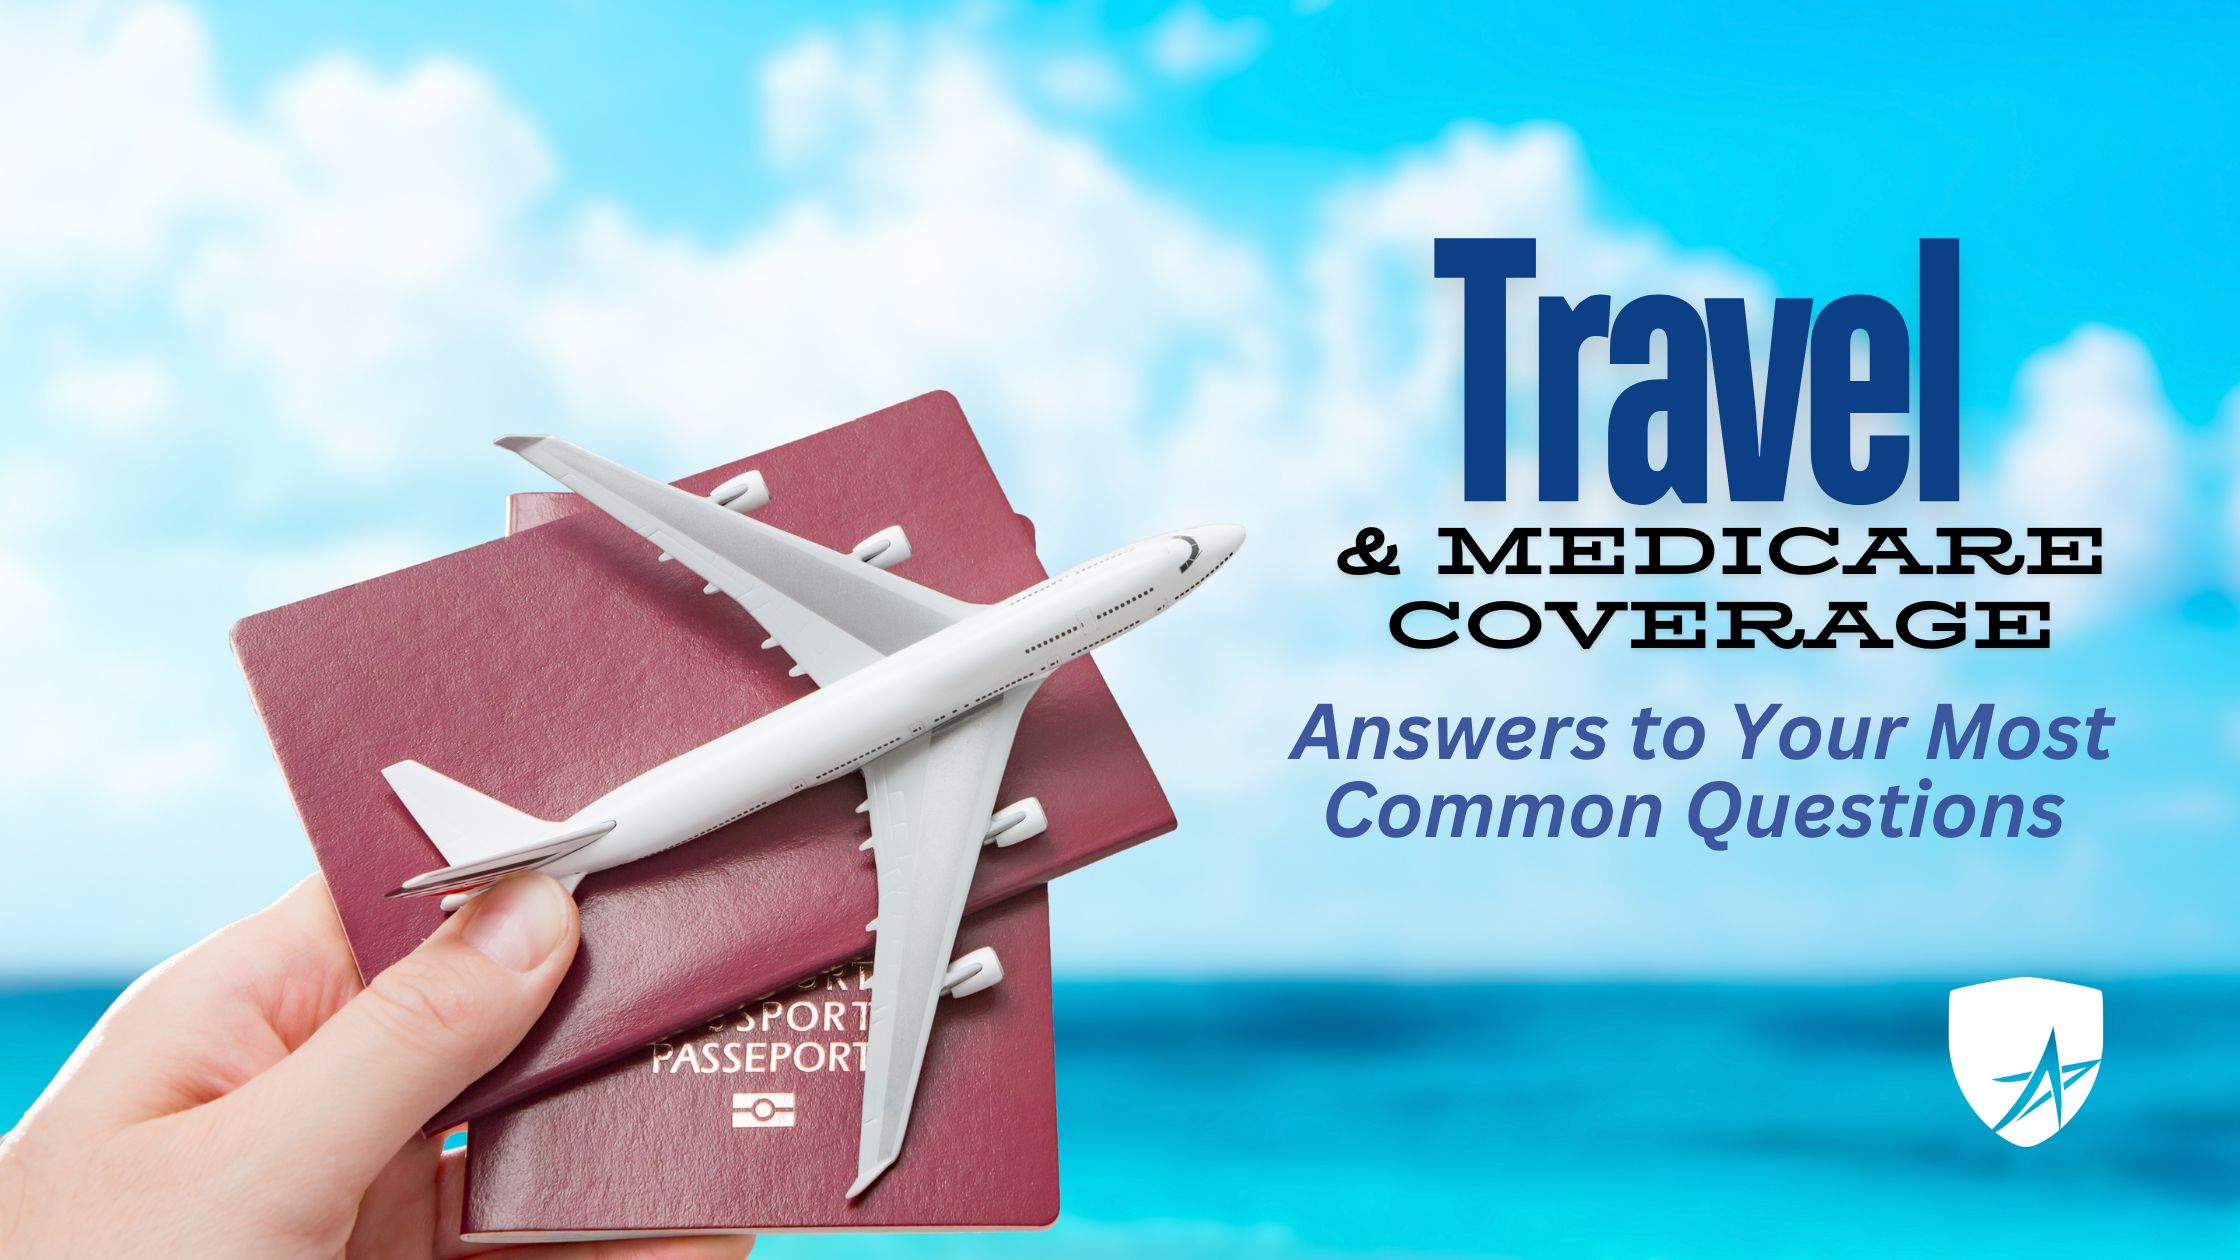 Exploring Medicare Coverage and Travel: Answers to Your Most Common Questions